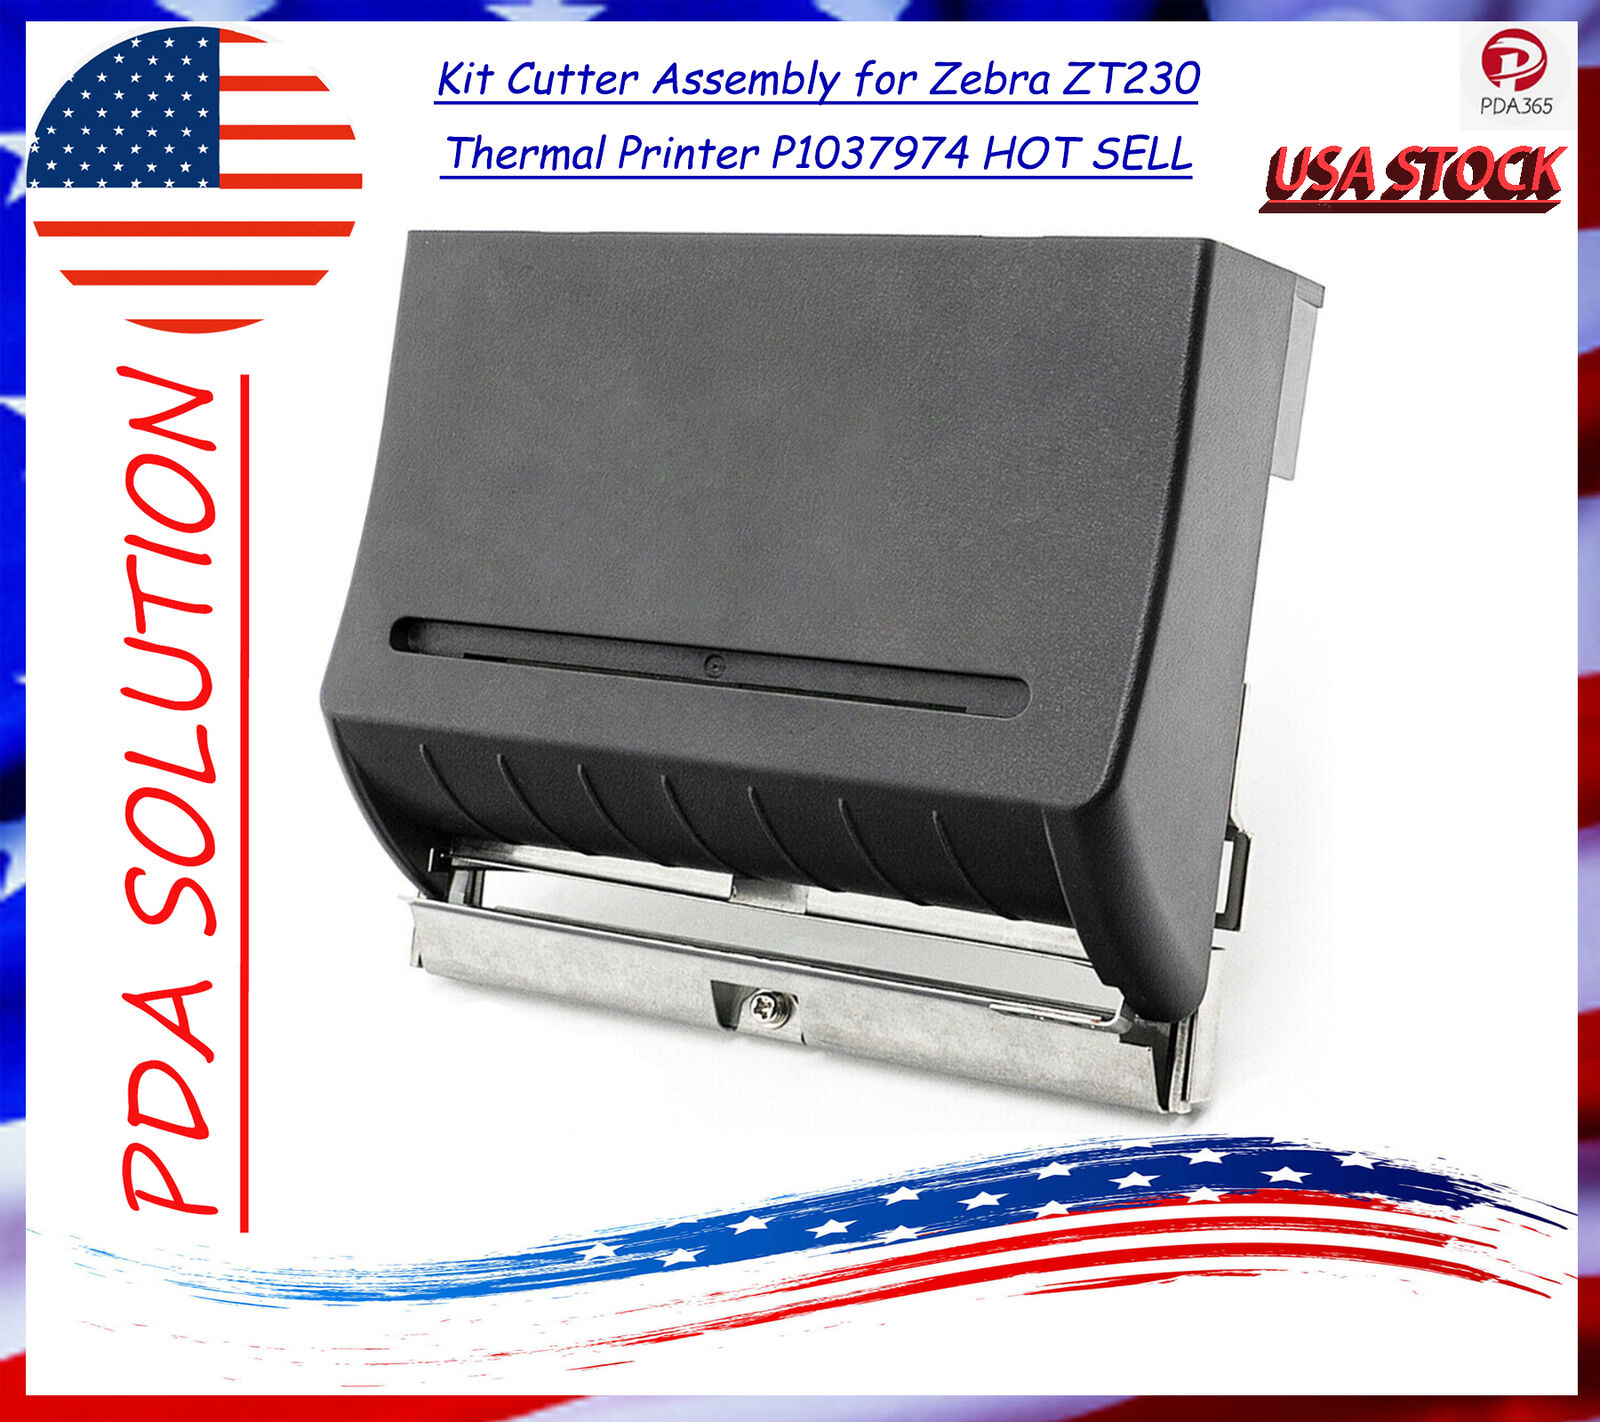 Kit Cutter Assembly for Zebra ZT230 Thermal Printer P1037974 HOT SELL